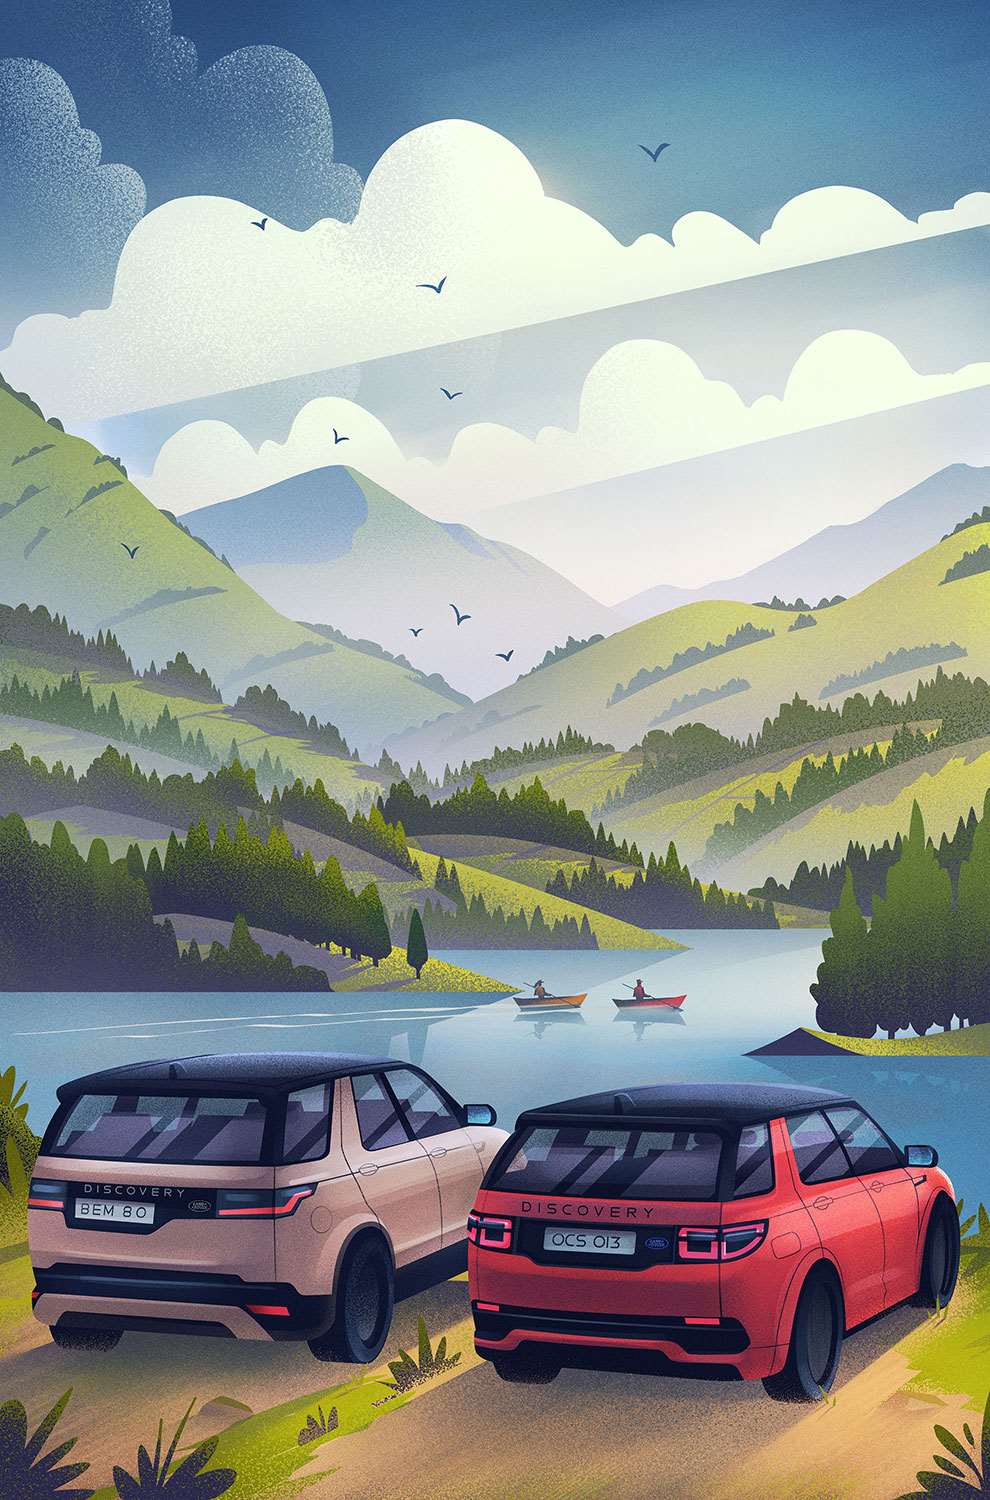 Brian Edward Miller, Family adventure illustration for automotive company Land Rover - digital countryside adventure illustration of 2 cars parked on a lakeside. 